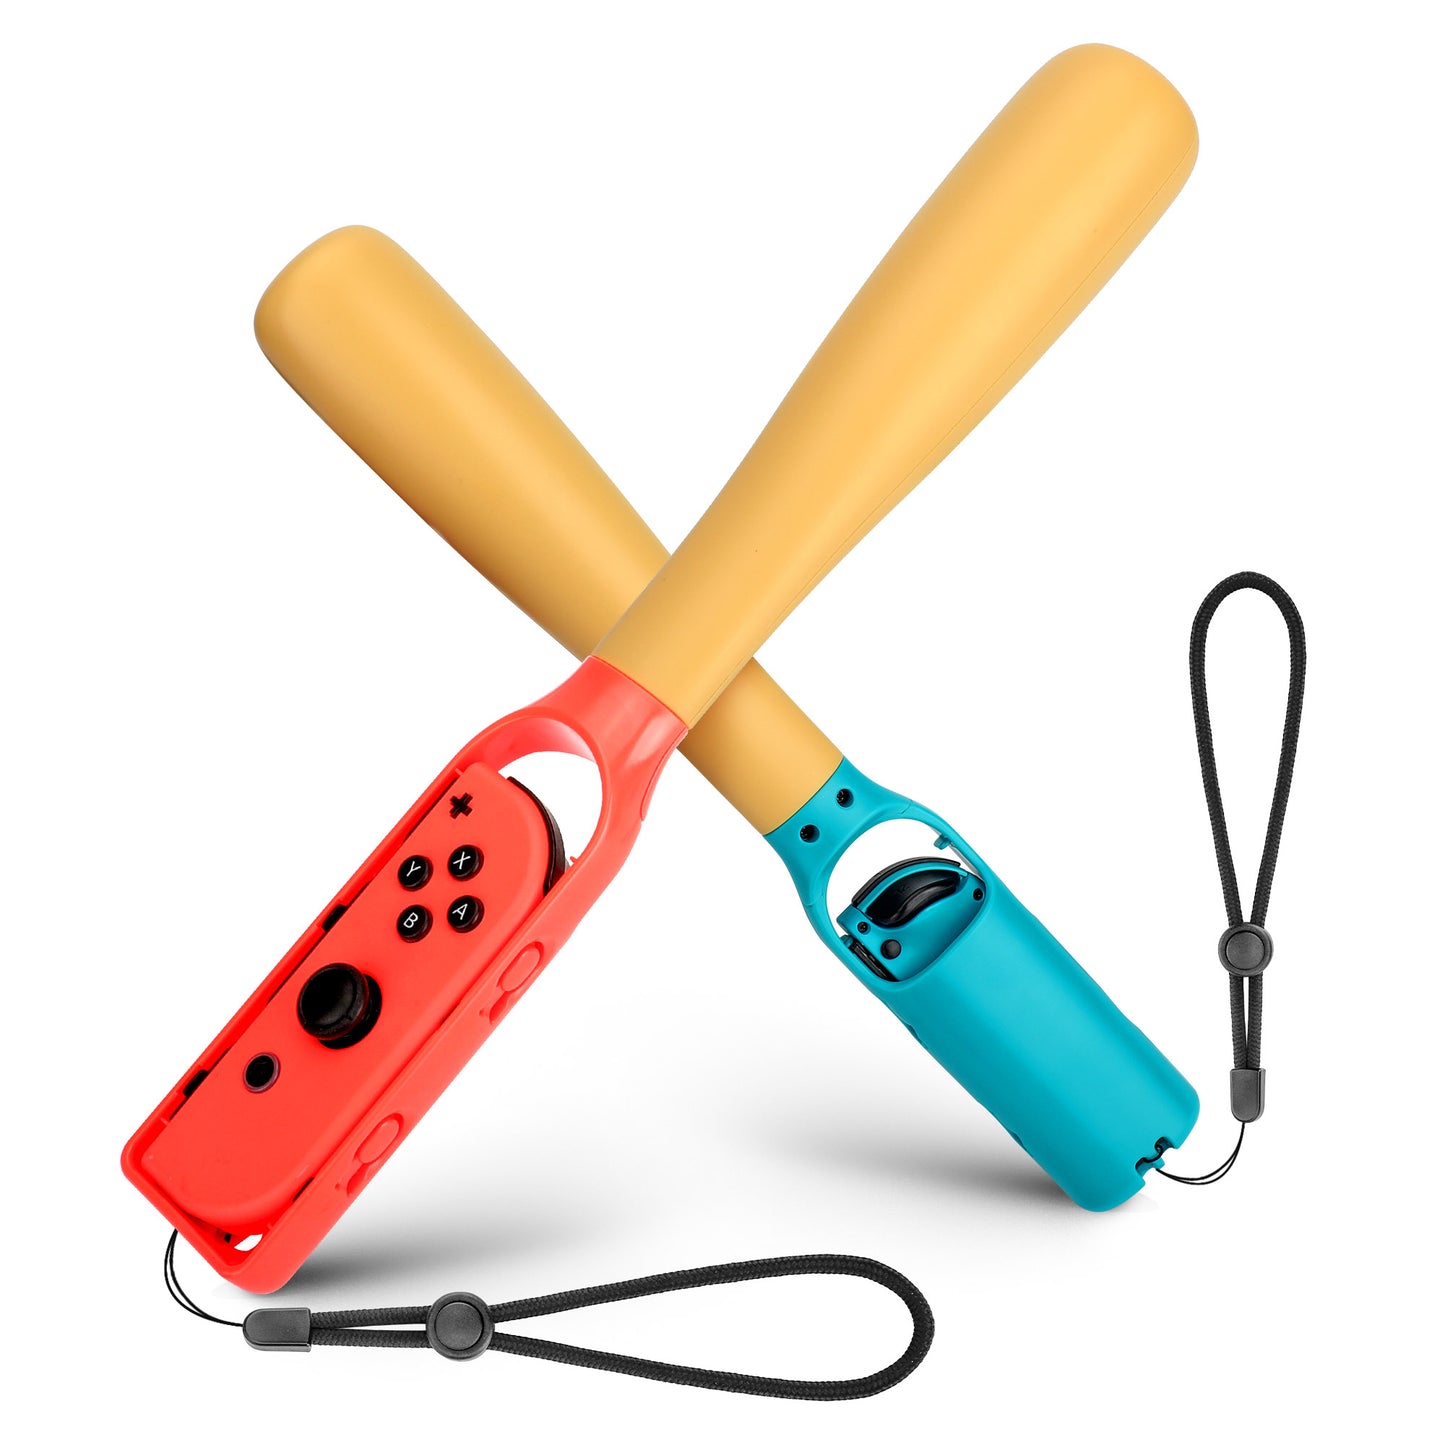 Switch Game Controller Grips - Enhance Your Gaming Experience with Comfort and Durability